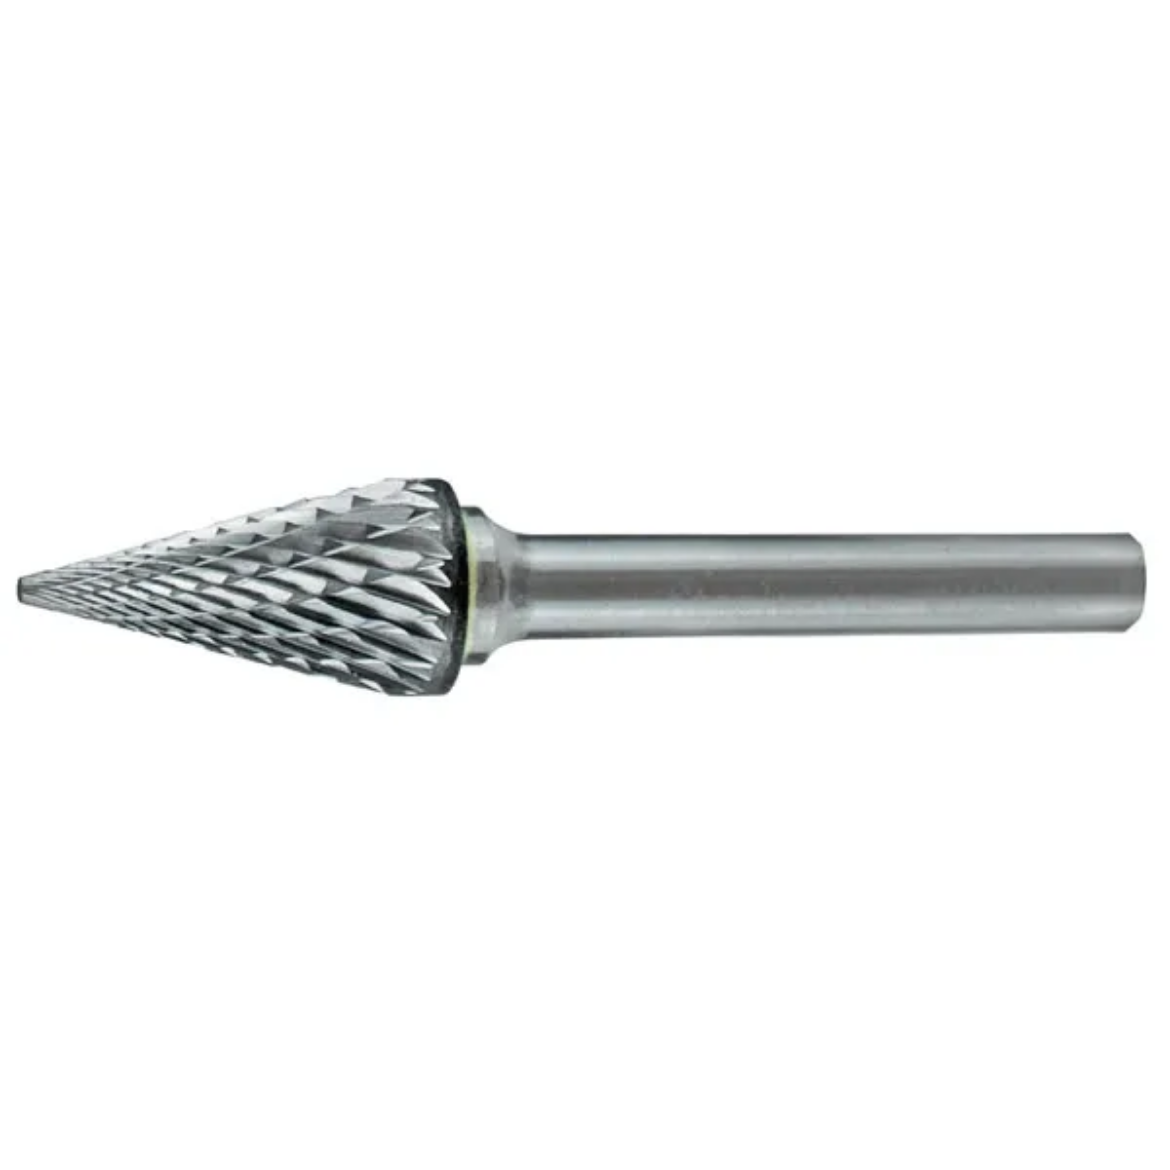 Picture of HOLEMAKER CARBIDE BURR, CONE SHAPE, 5/8" X 1-1/8" HEAD, 1/4" SHANK DC